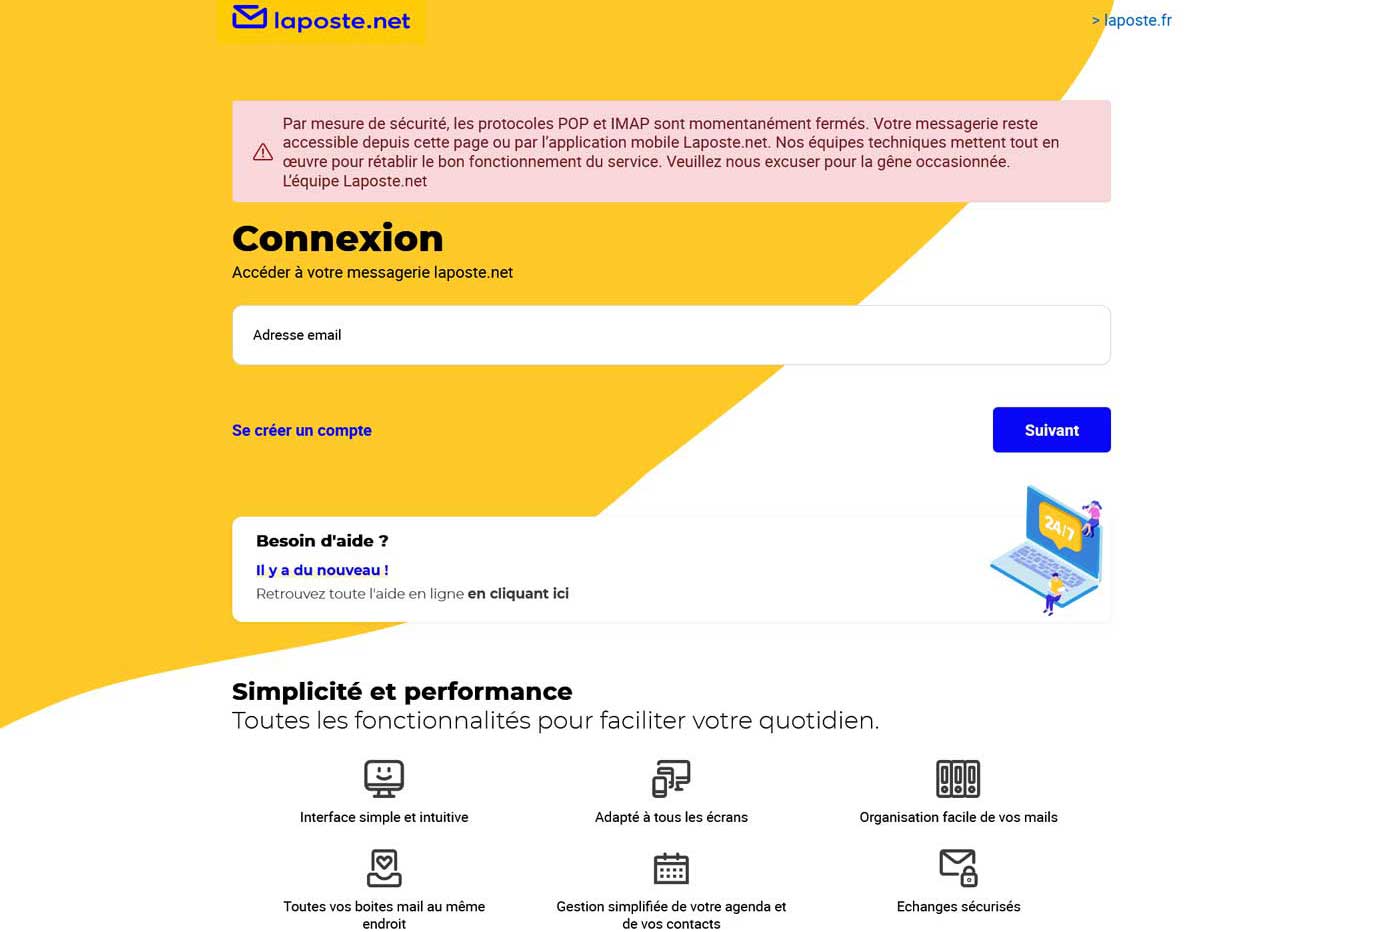 This is the reason why you do not receive your emails on Laposte.net